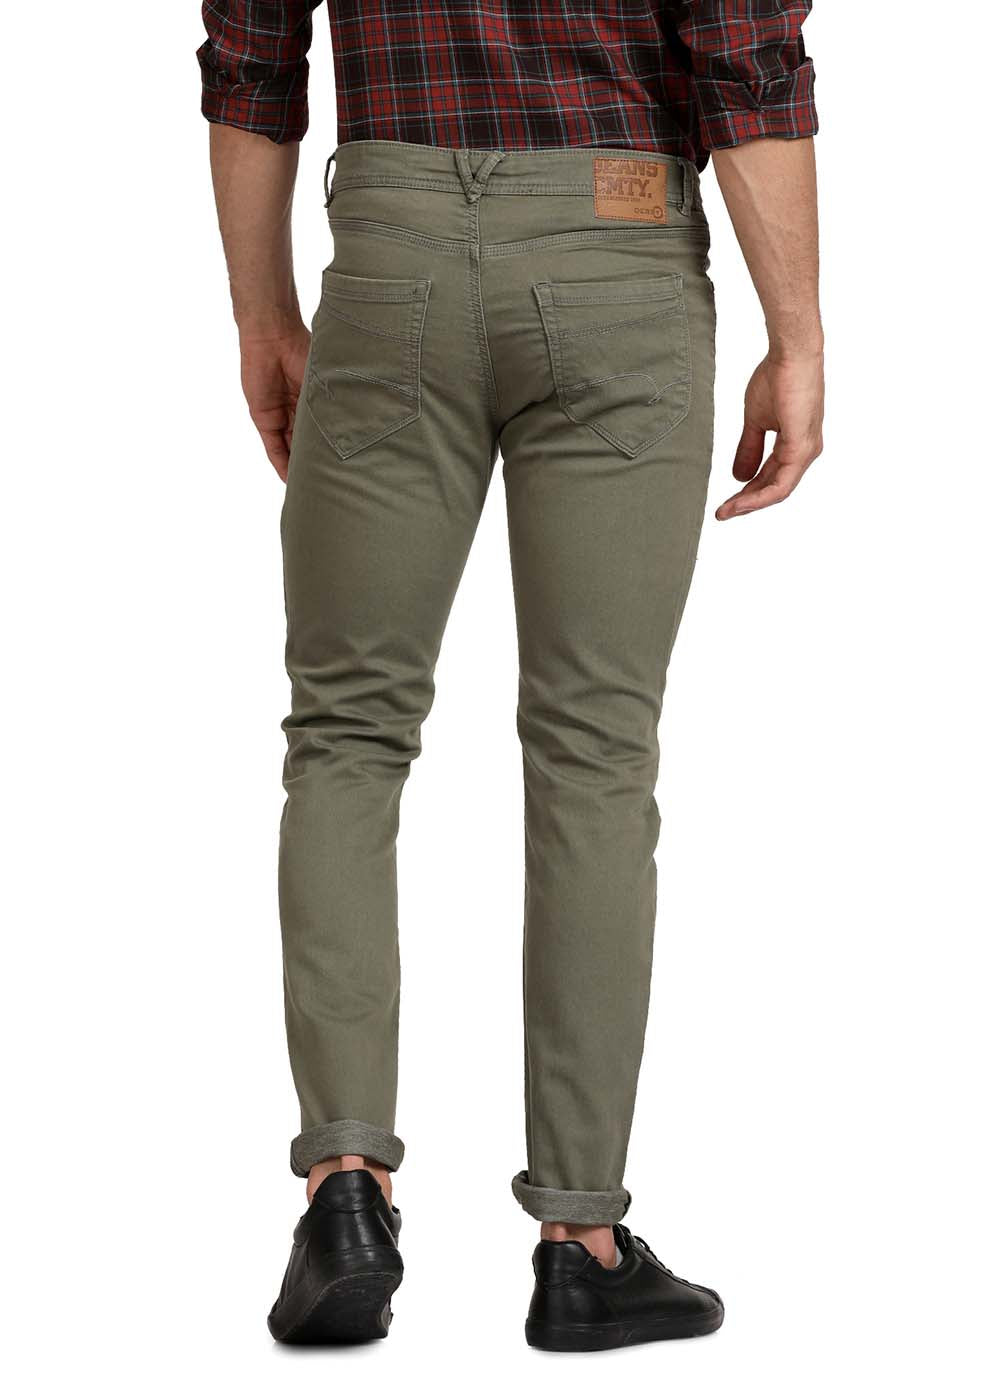 Derby Olive Clean Look Slim Fit Knitted Jeans